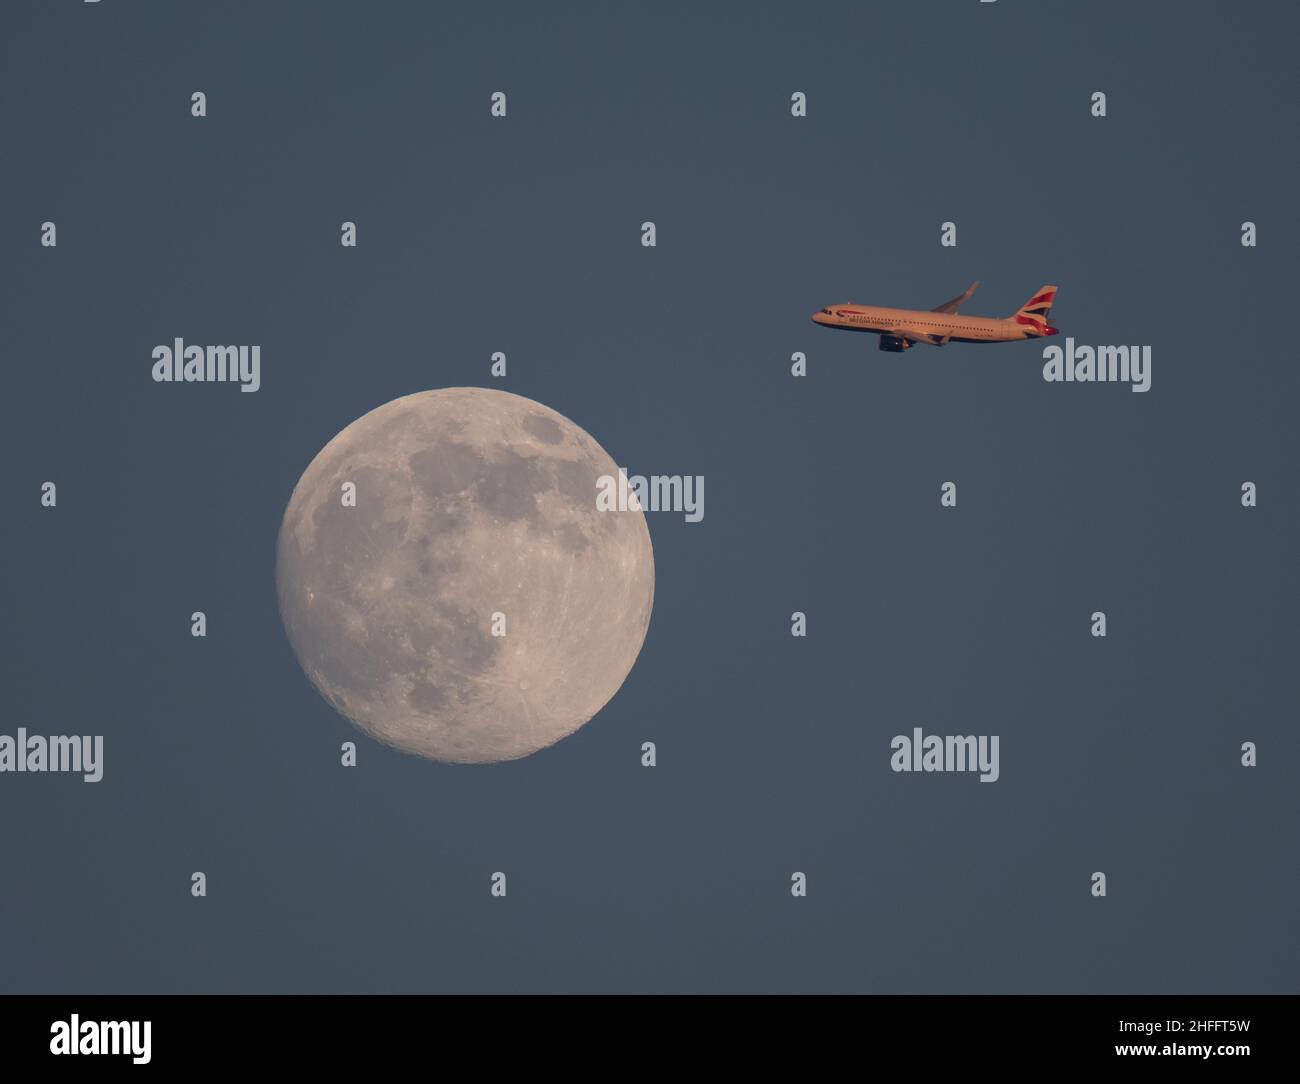 London, UK. 16 January 2022. Early evening British Airways flight from Tenerife on approach to London Heathrow and bathed in setting sunlight passes the almost full Moon over London. Credit: Malcolm Park/Alamy Live News Stock Photo